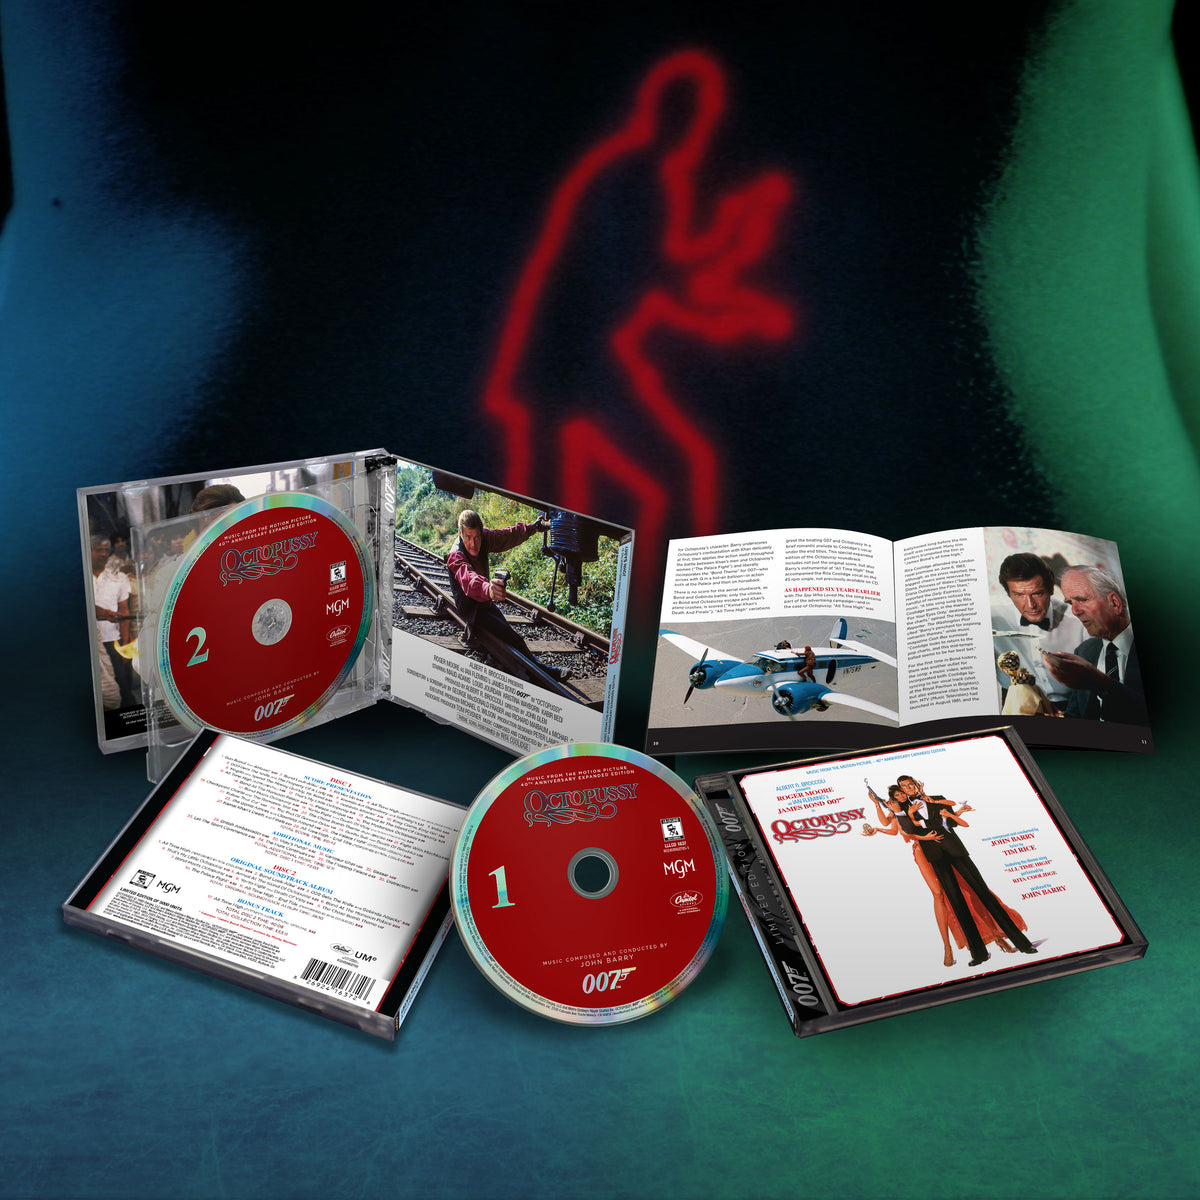 James Bond Octopussy Soundtrack Double CD Set - 40th Anniversary Expanded Remastered Edition